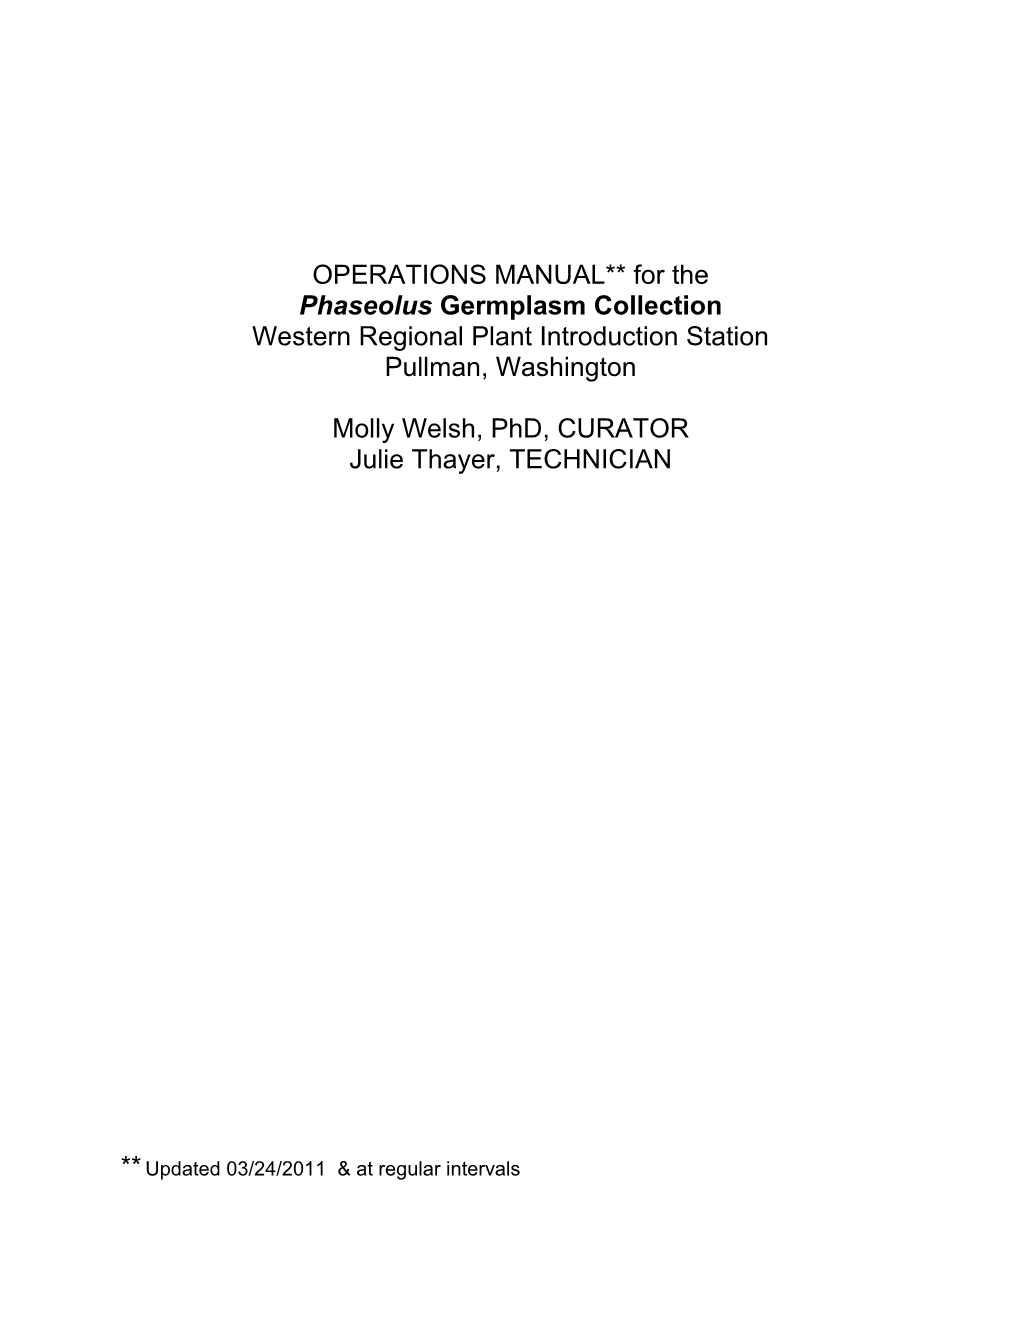 OPERATIONS MANUAL for The